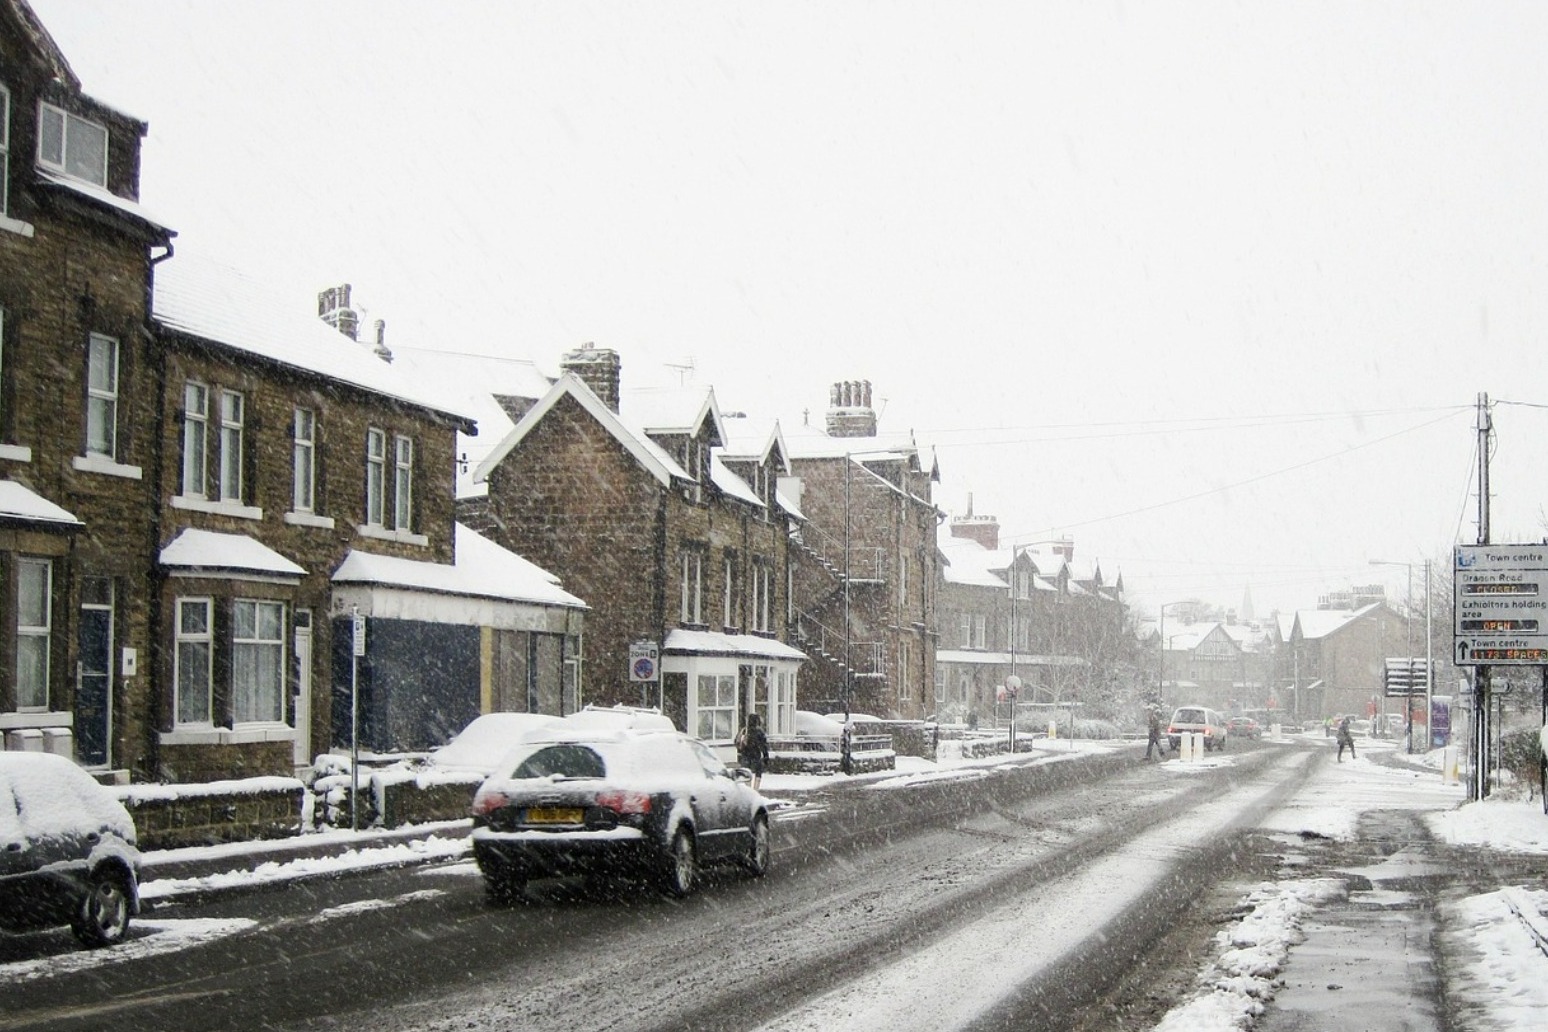 Weather Warnings issued as snow hits the UK 